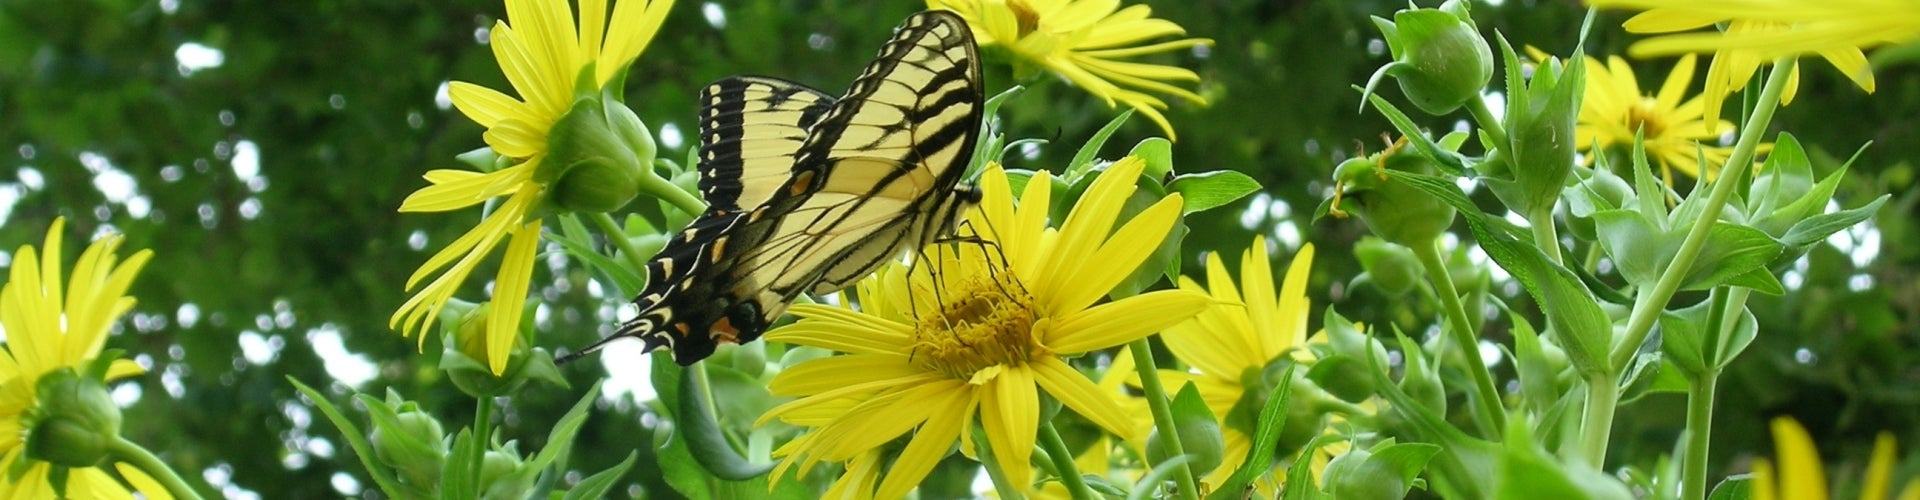 A Yellow and black butterfly perched on a small sunflower. 